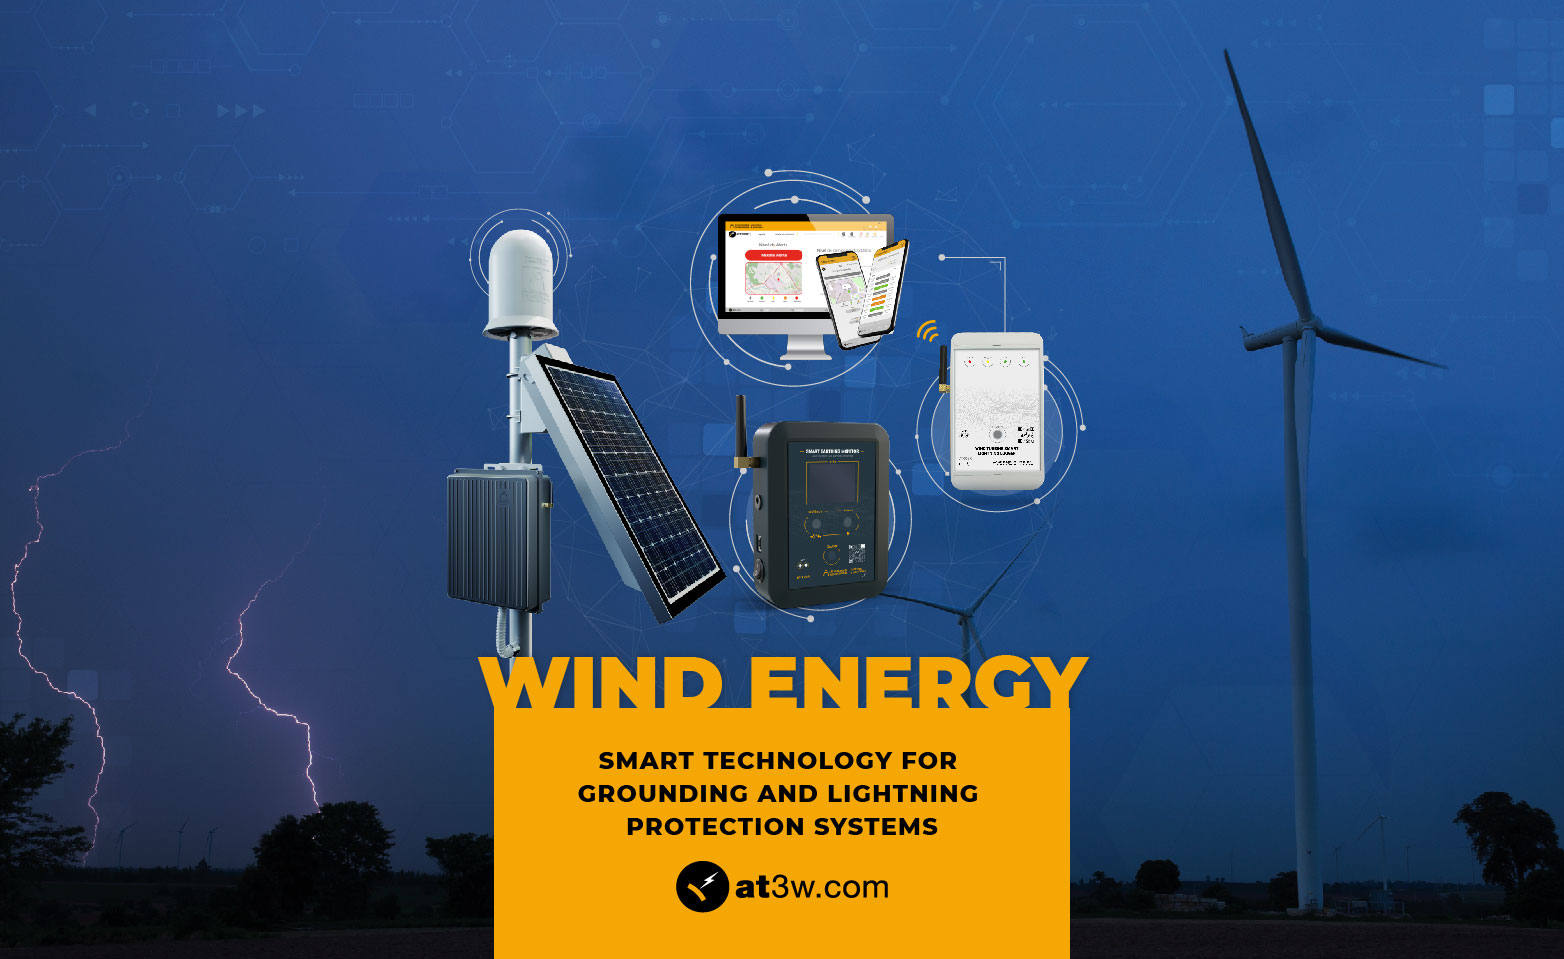 Aplicaciones Tecnológicas S.A. has developed the precise solutions for the efficient management of grounding and lightning protection systems in wind farms, maximising occupational safety and cost savings. We are at WindEurope Bilbao 2022 presenting the advanced equipment SMART EARTHING MONITORING SYSTEM, WIND TURBINE SMART LIGHTNING LOGGER and ATSTORM®.